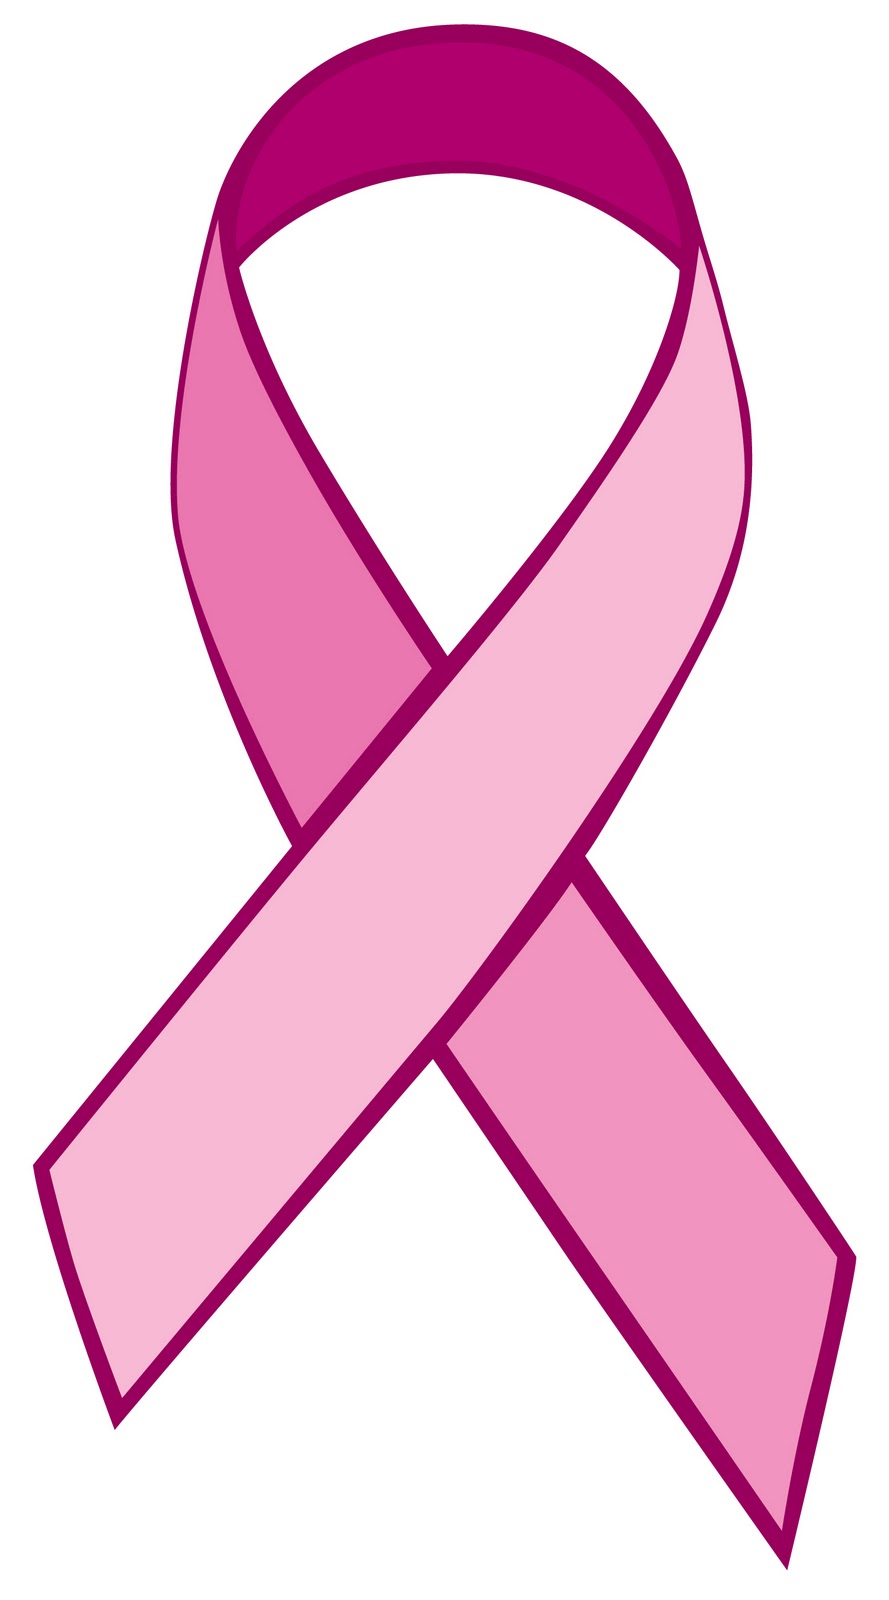 Breast Cancer Ribbon Vector Free - Clipart library